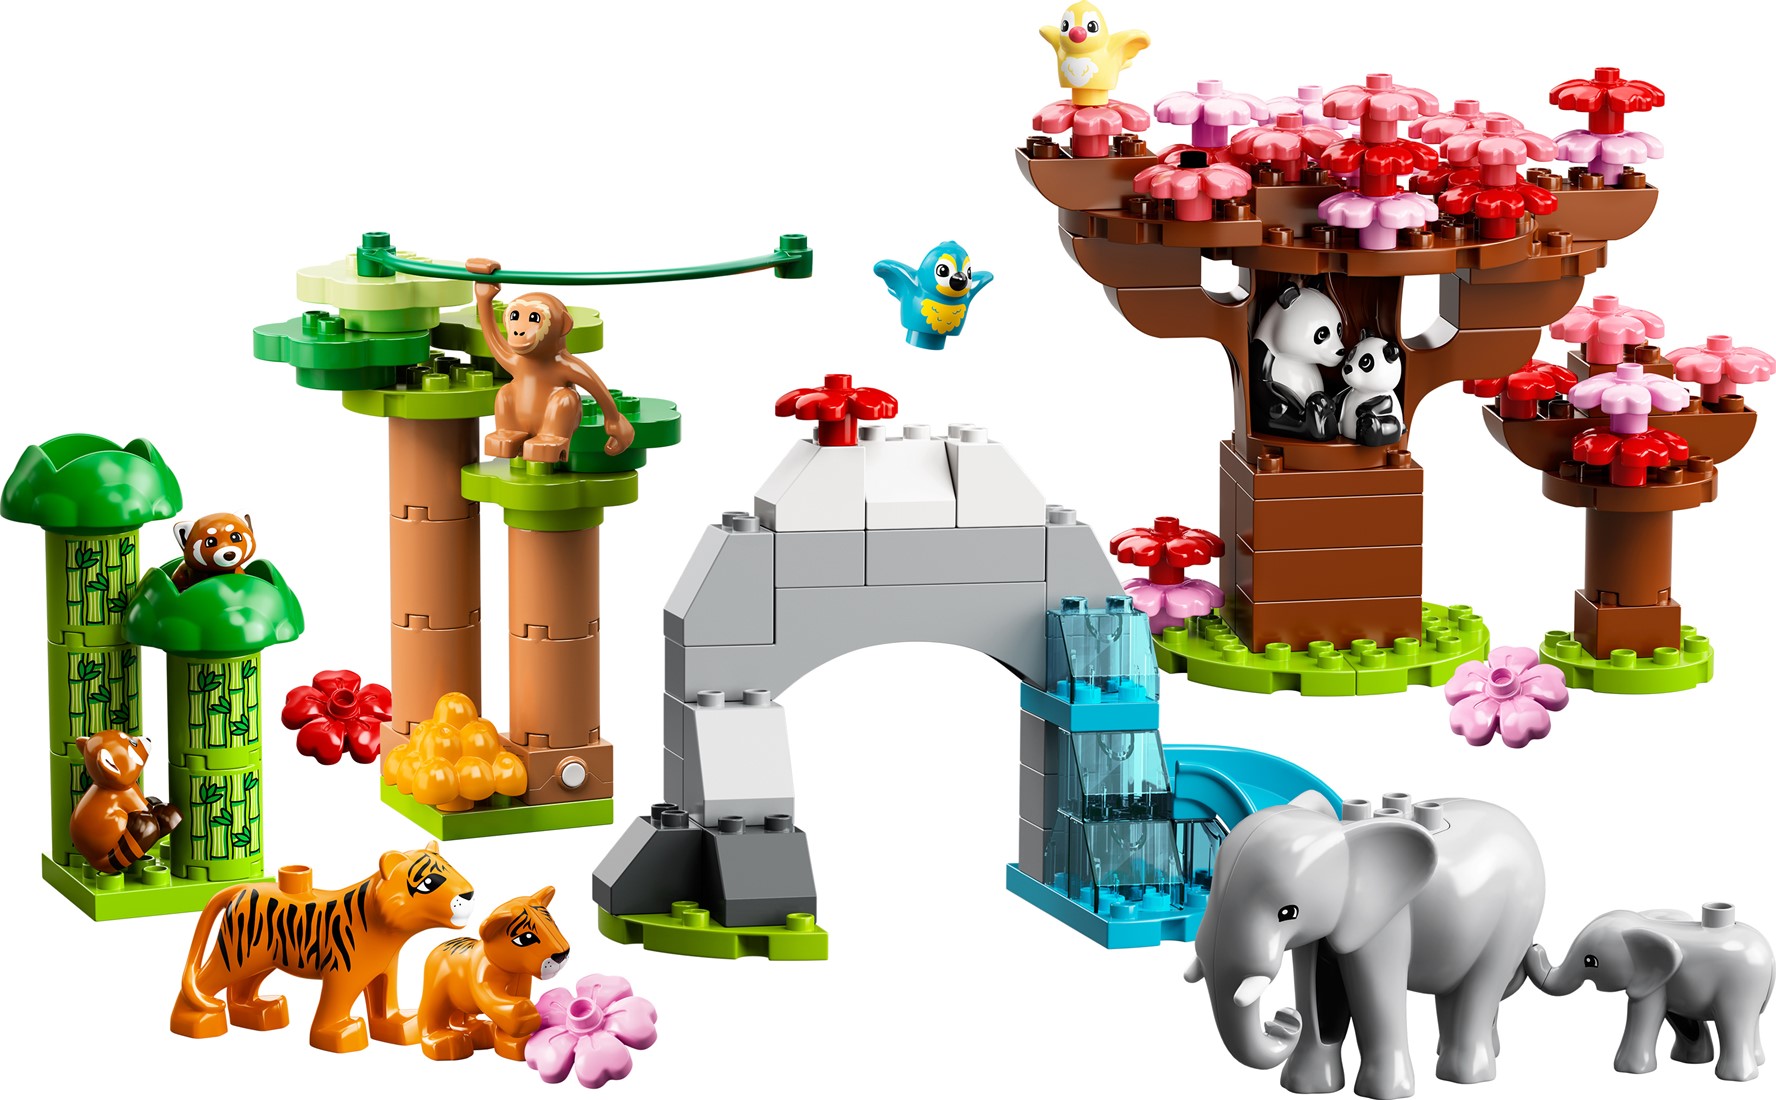 https://www.planethappy.be/resize/96767156_2739628765.jpg/0/1100/True/lego-duplo-town-animaux-sauvages-d-apos-asie-10974-3.jpg